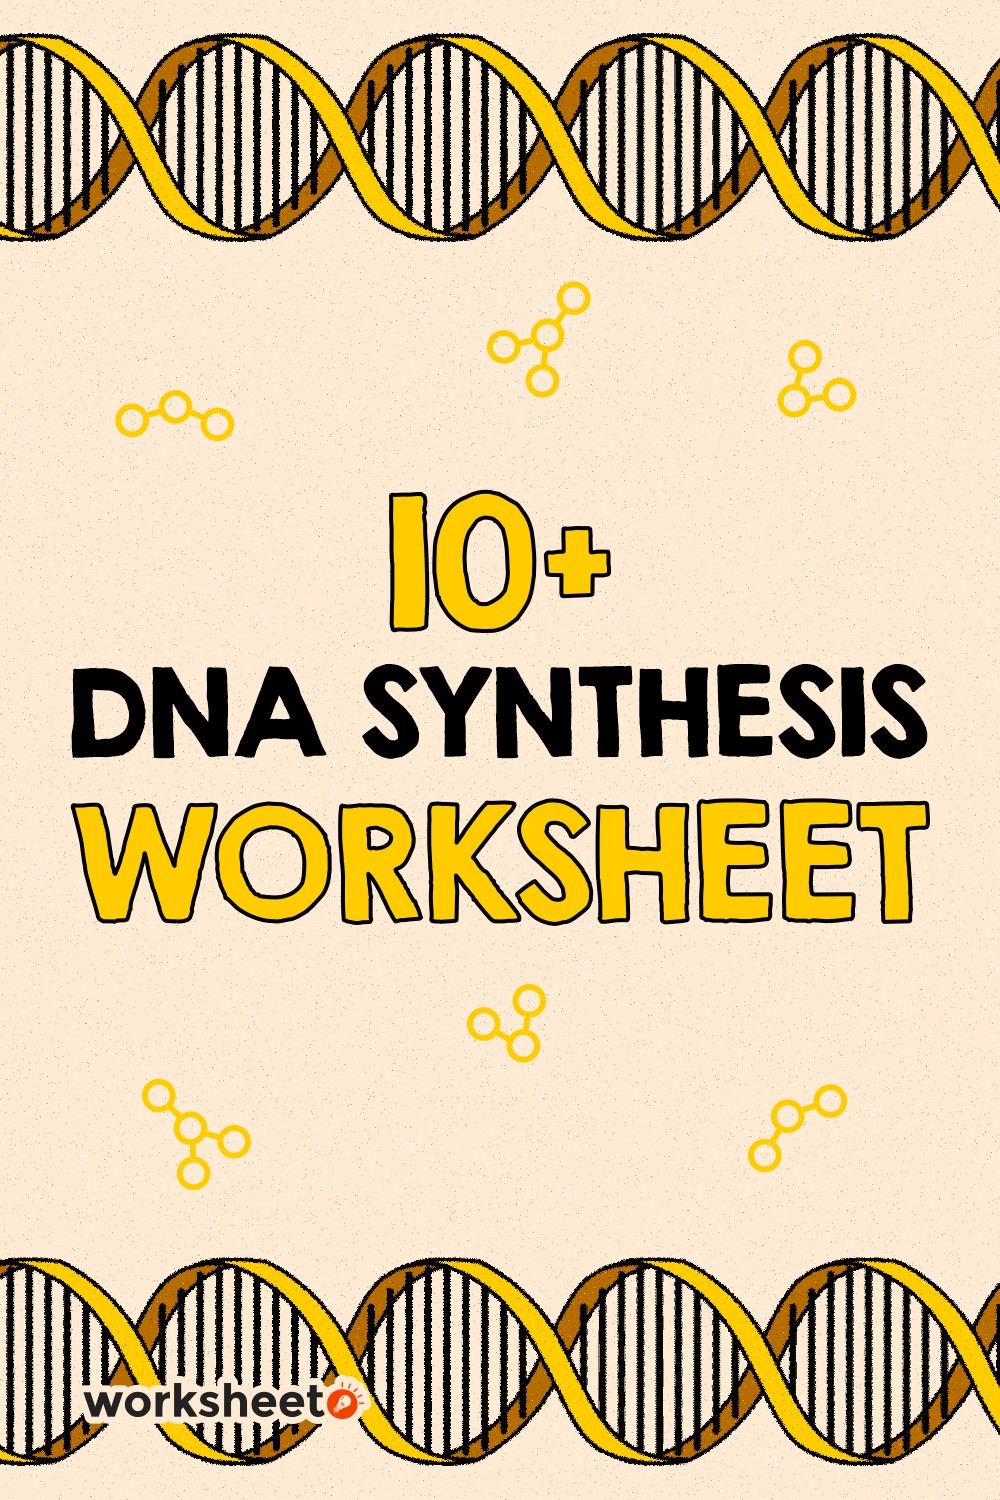 DNA Synthesis Worksheet